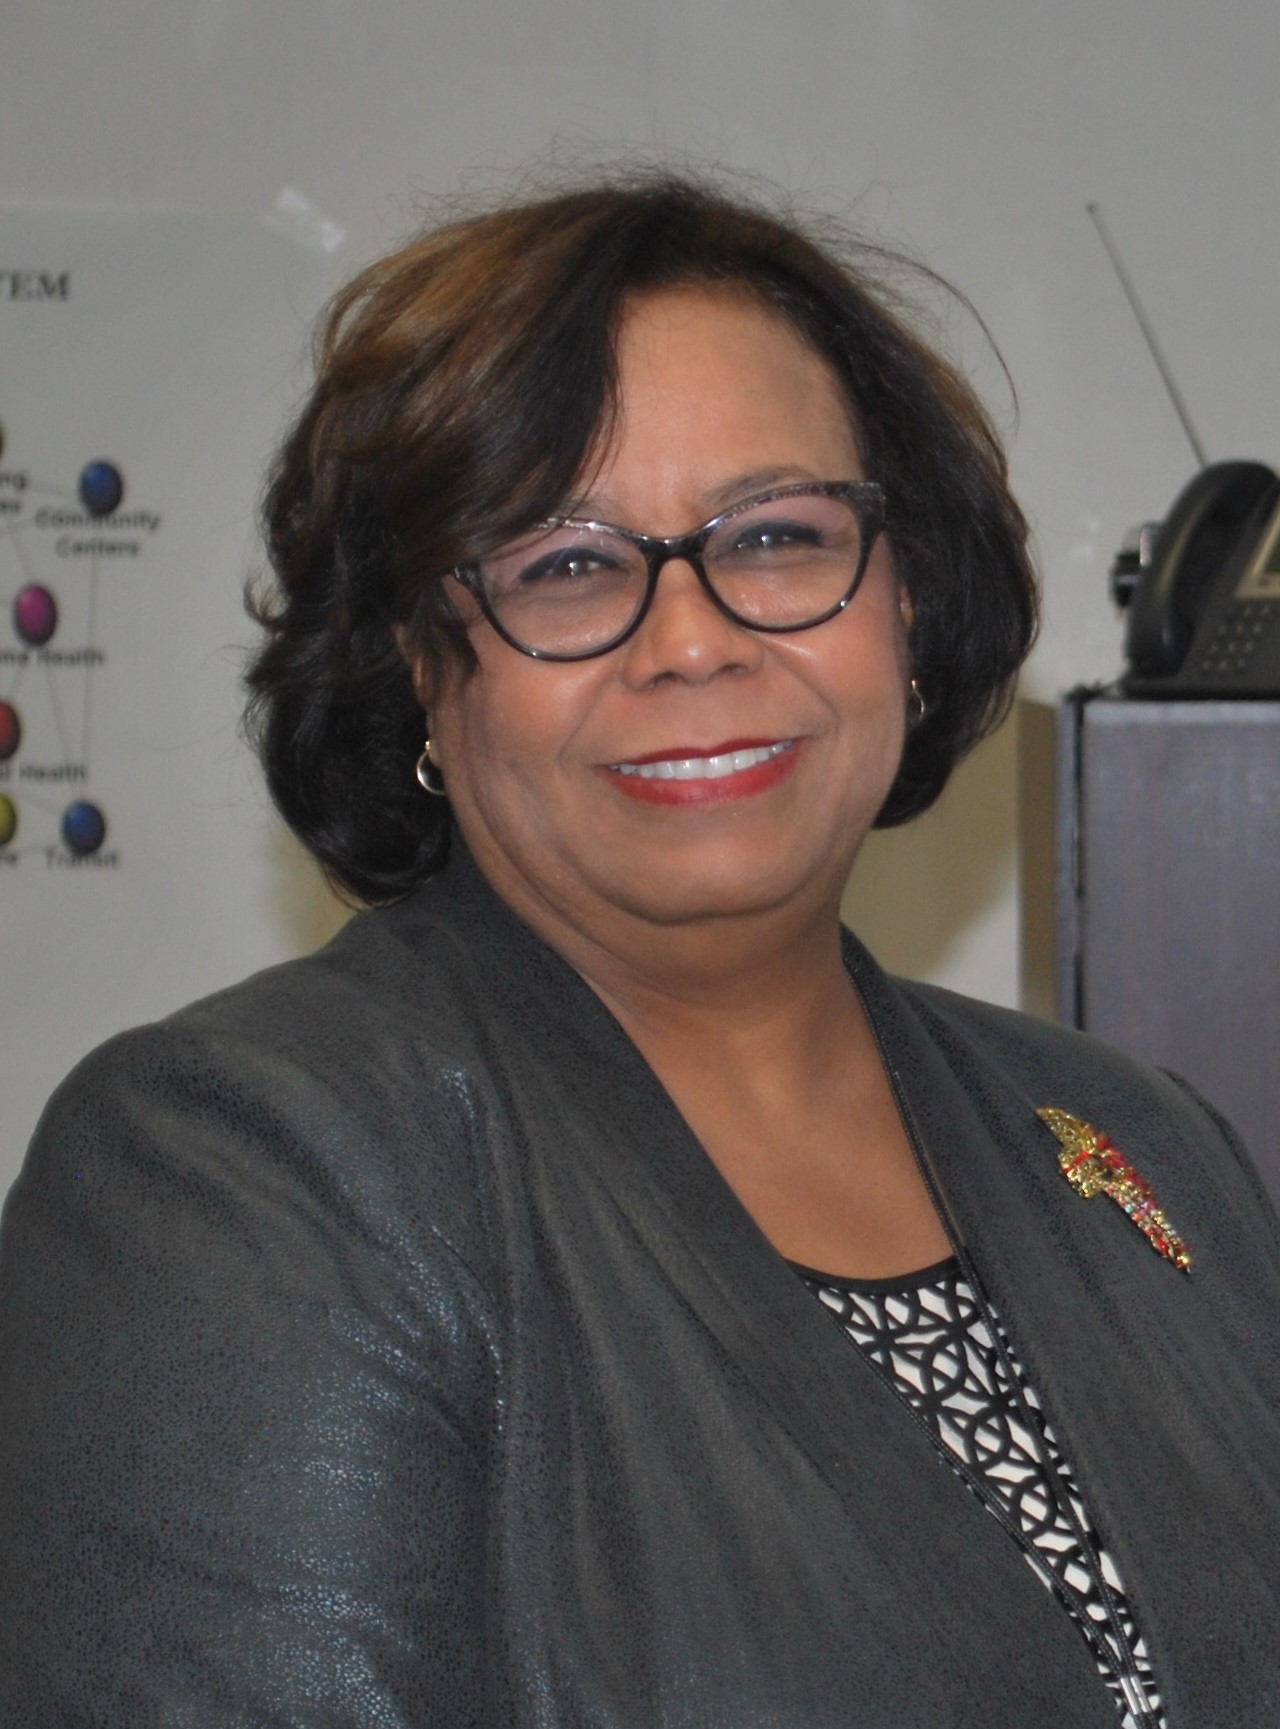 Kane County Health Department Executive Director Barbara Jeffers, who is leaving office December 1.